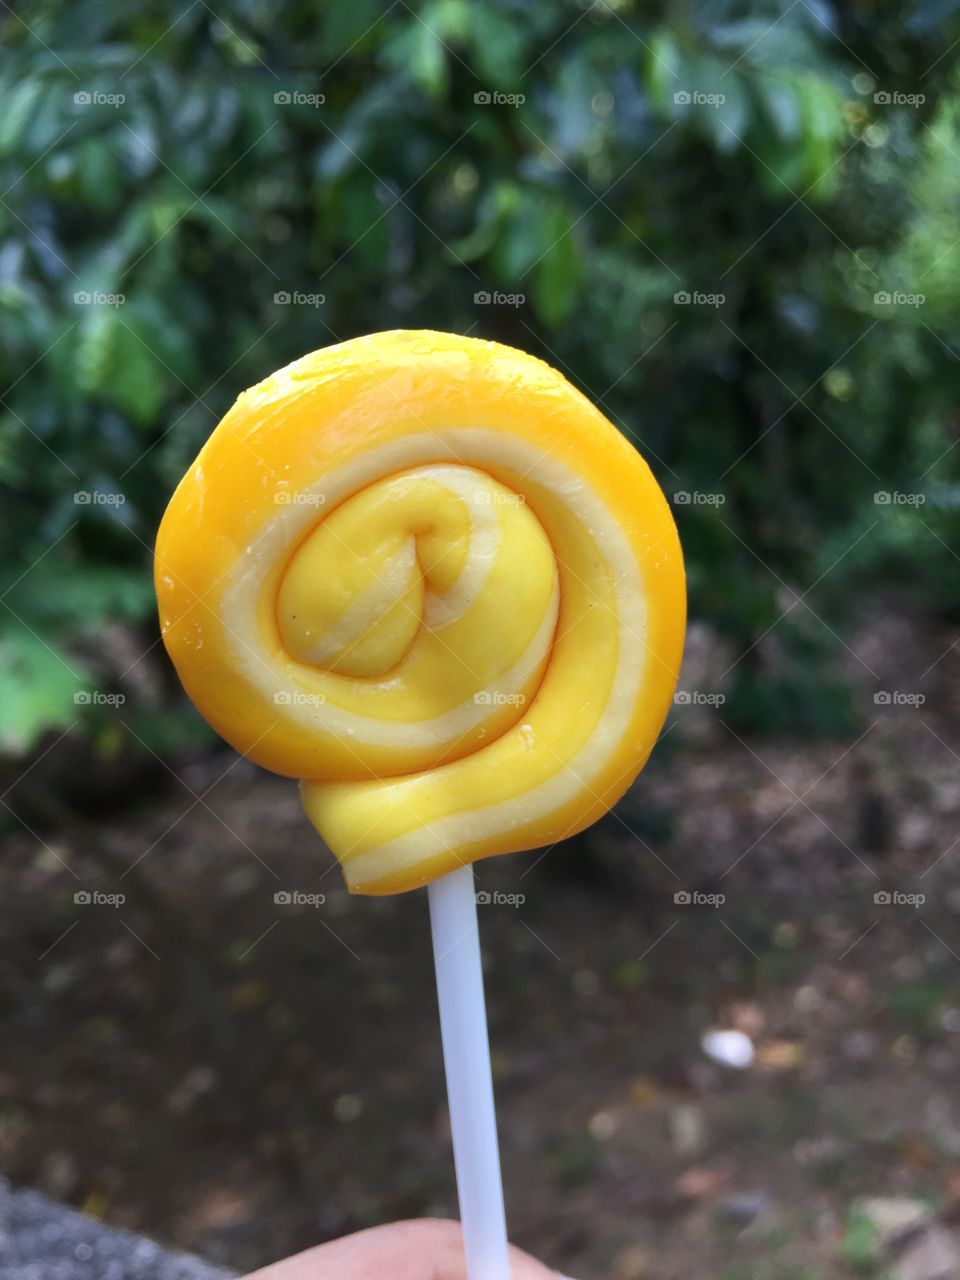 Lollypop 🍭My child’s favourite snack 